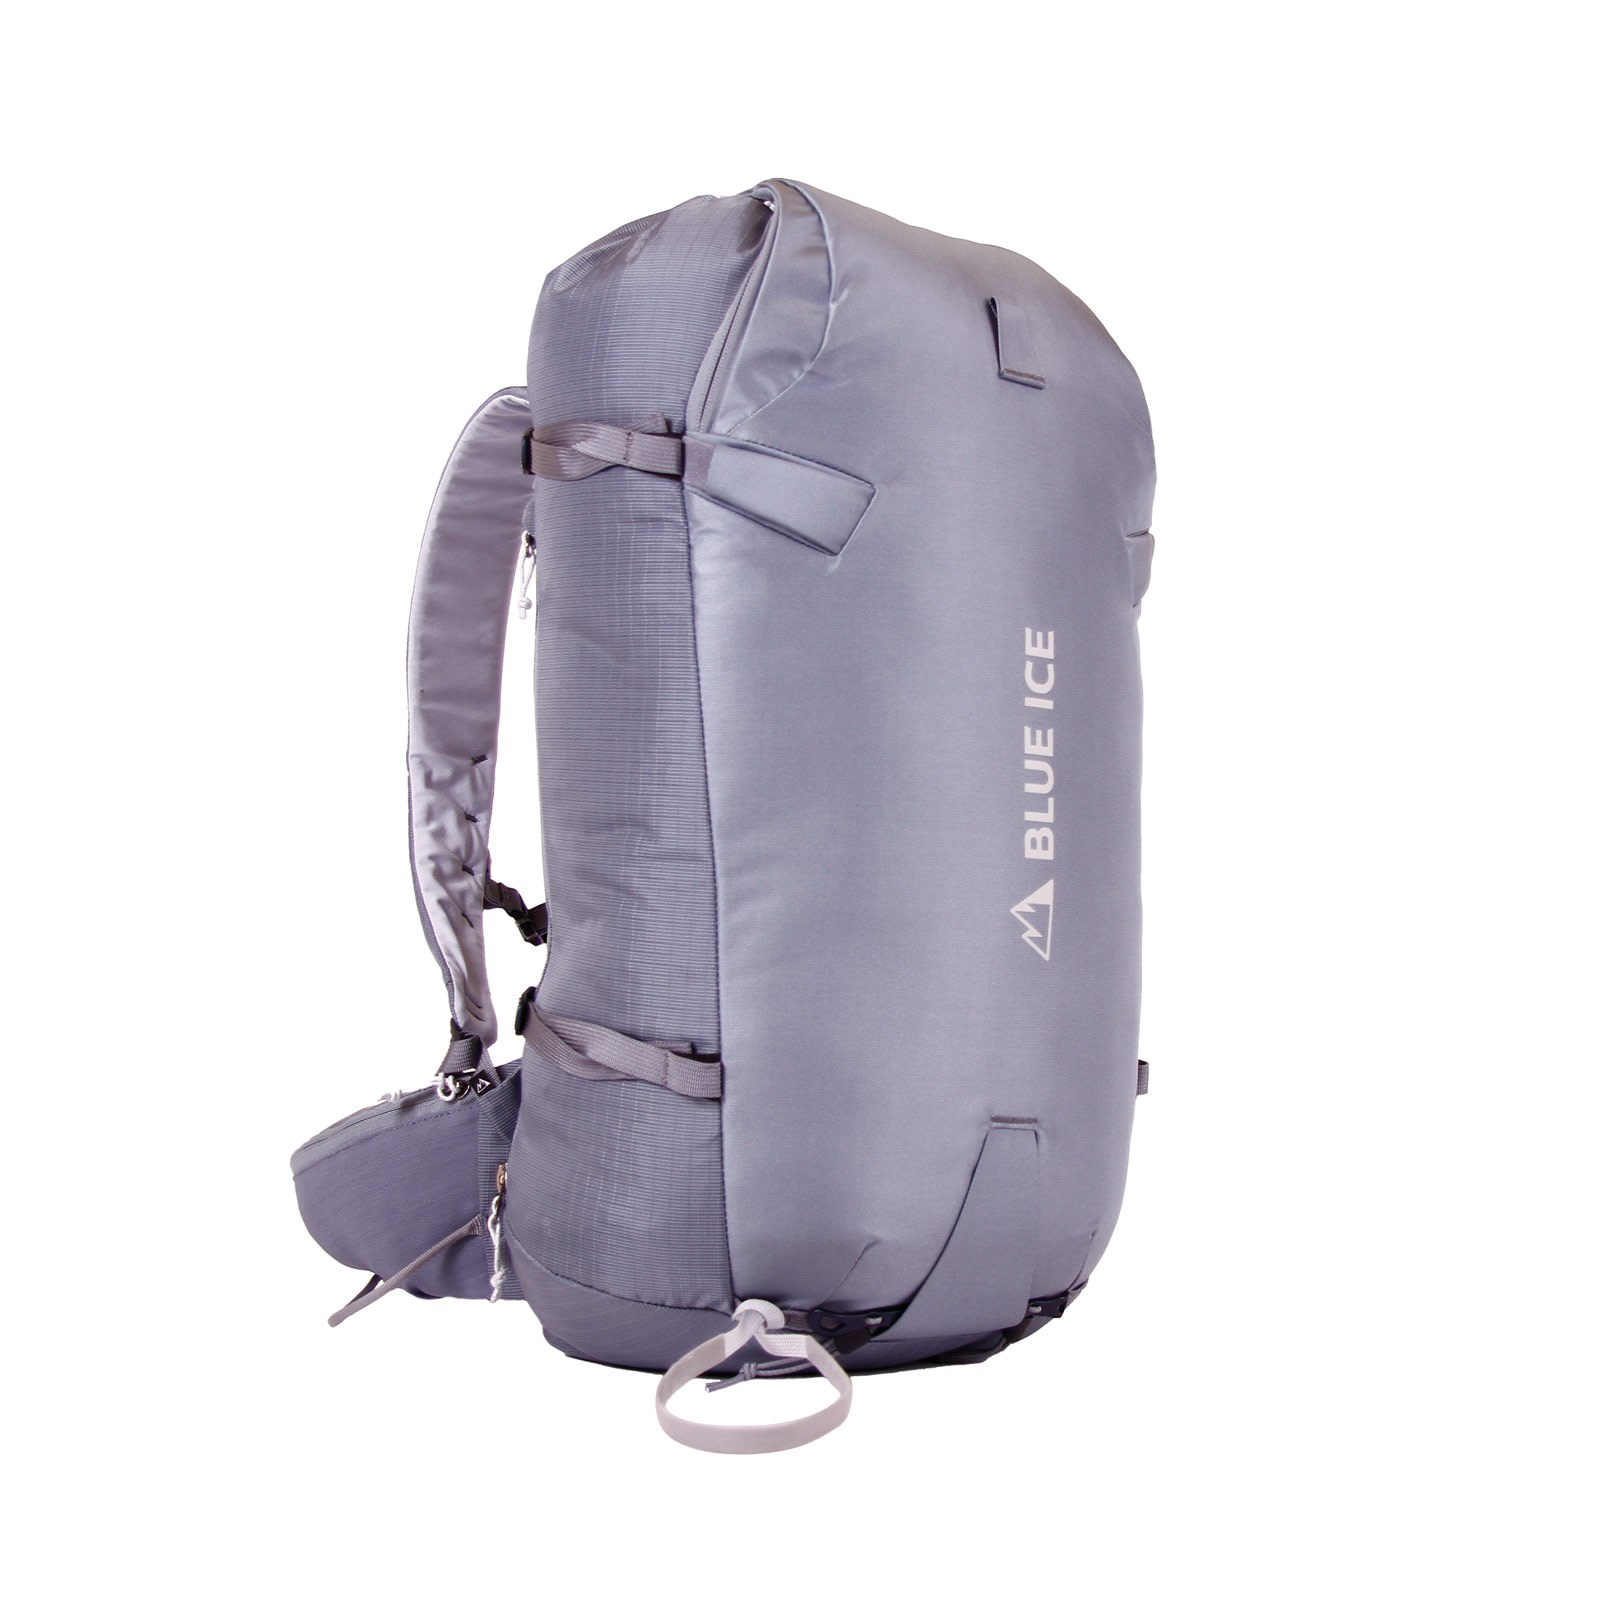 40L Backpack for Ski Mountaineering and Skiing - KUME – Blue Ice UK